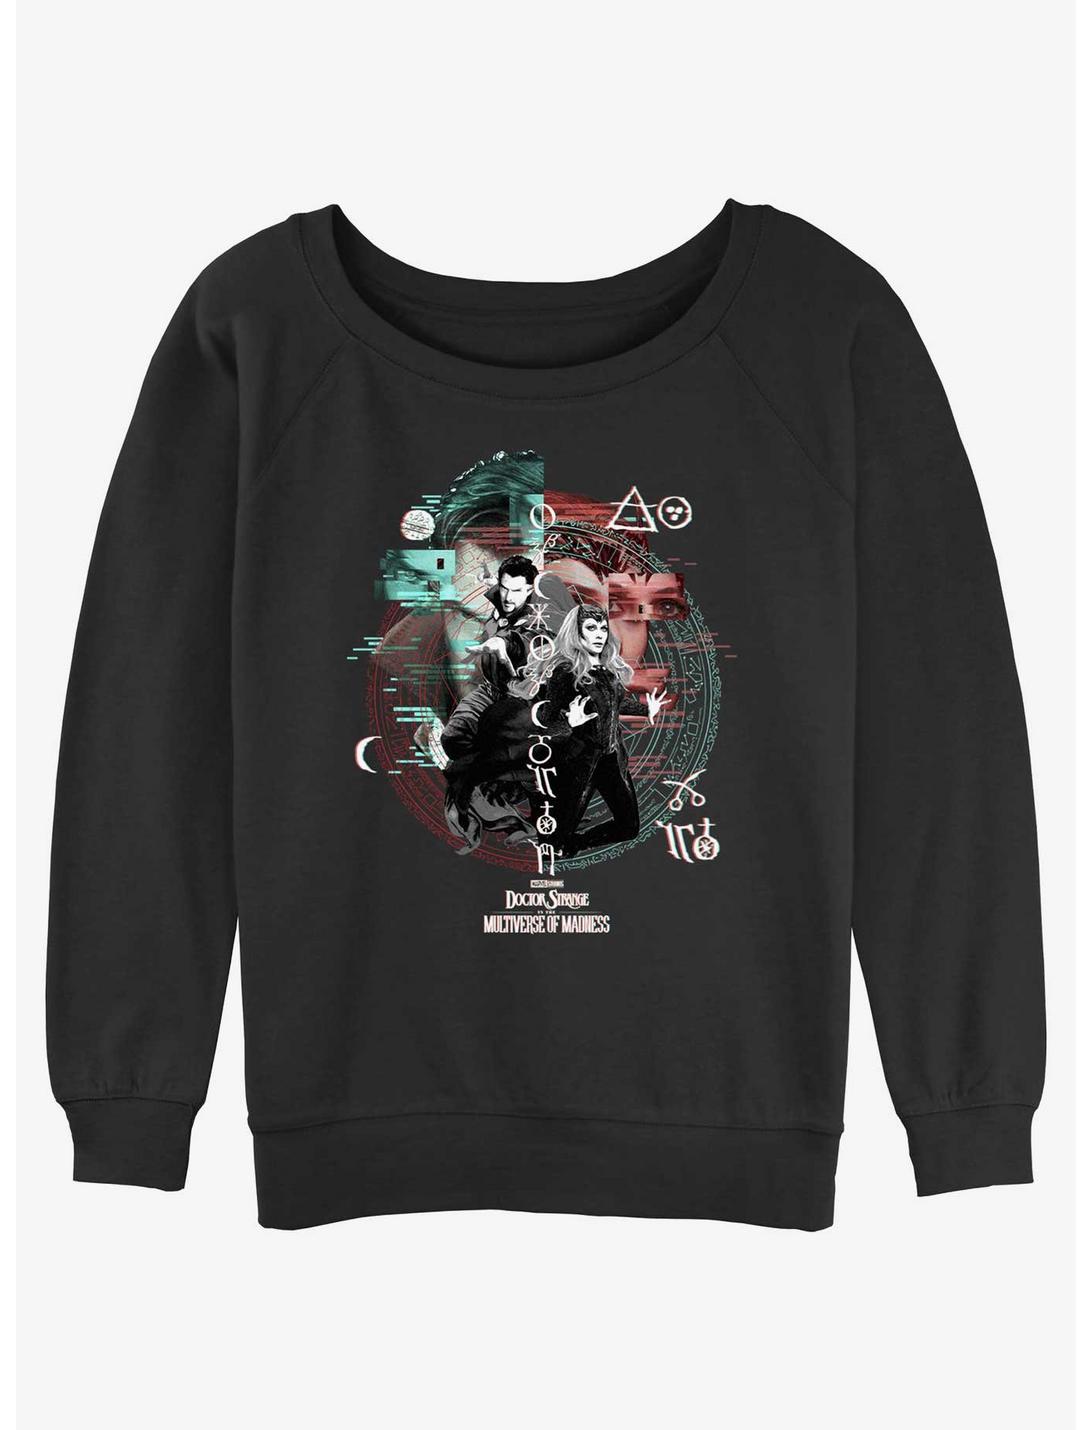 Marvel Doctor Strange in the Multiverse of Madness Magic Glitch Girls Slouchy Sweatshirt, BLACK, hi-res